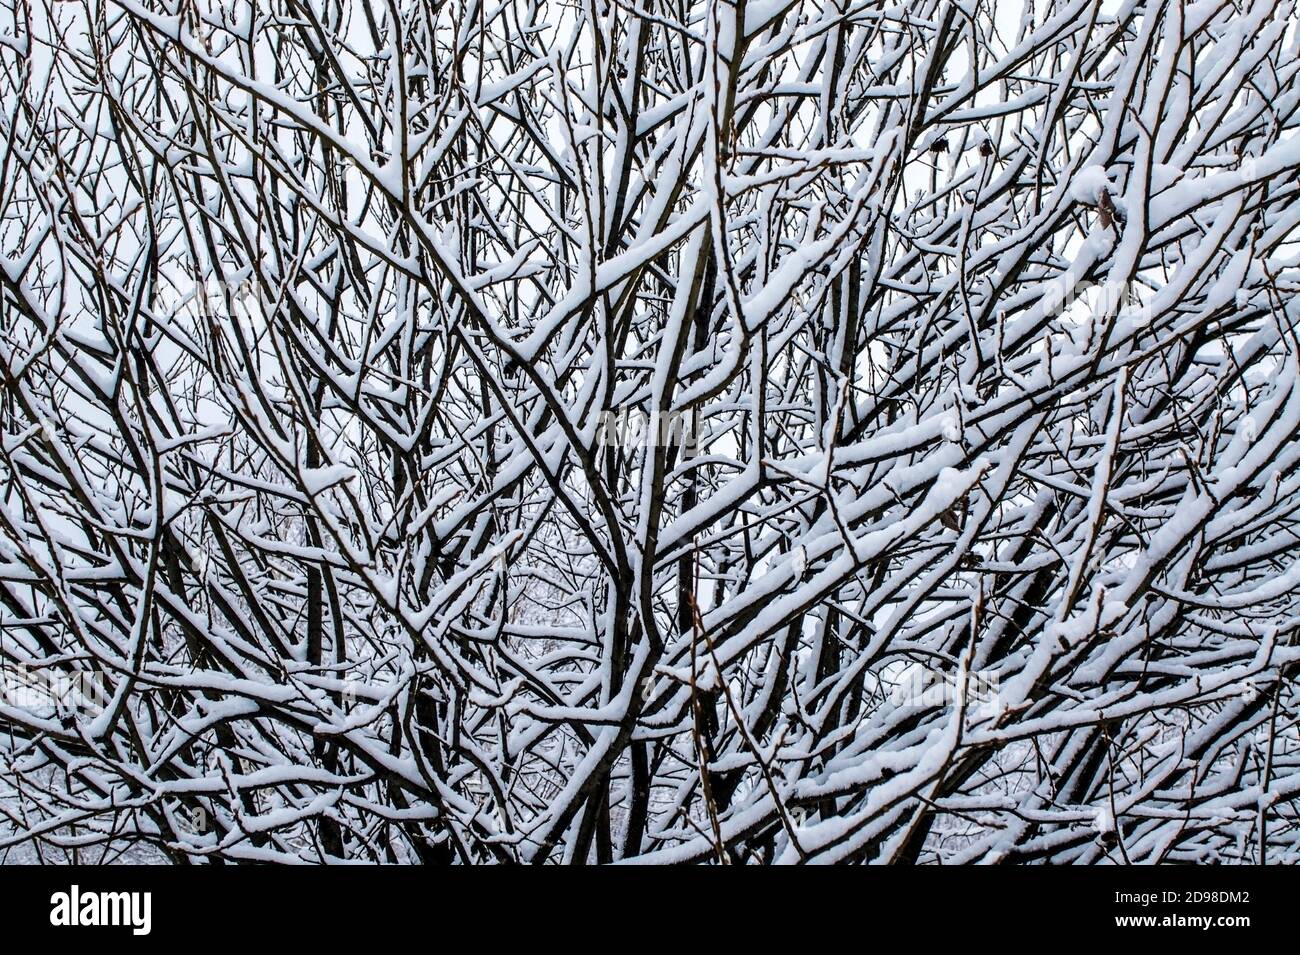 Abstract background from a pattern of snow-covered branches of a tree. Copy space, neutral winter palette, landscape, poster design Stock Photo